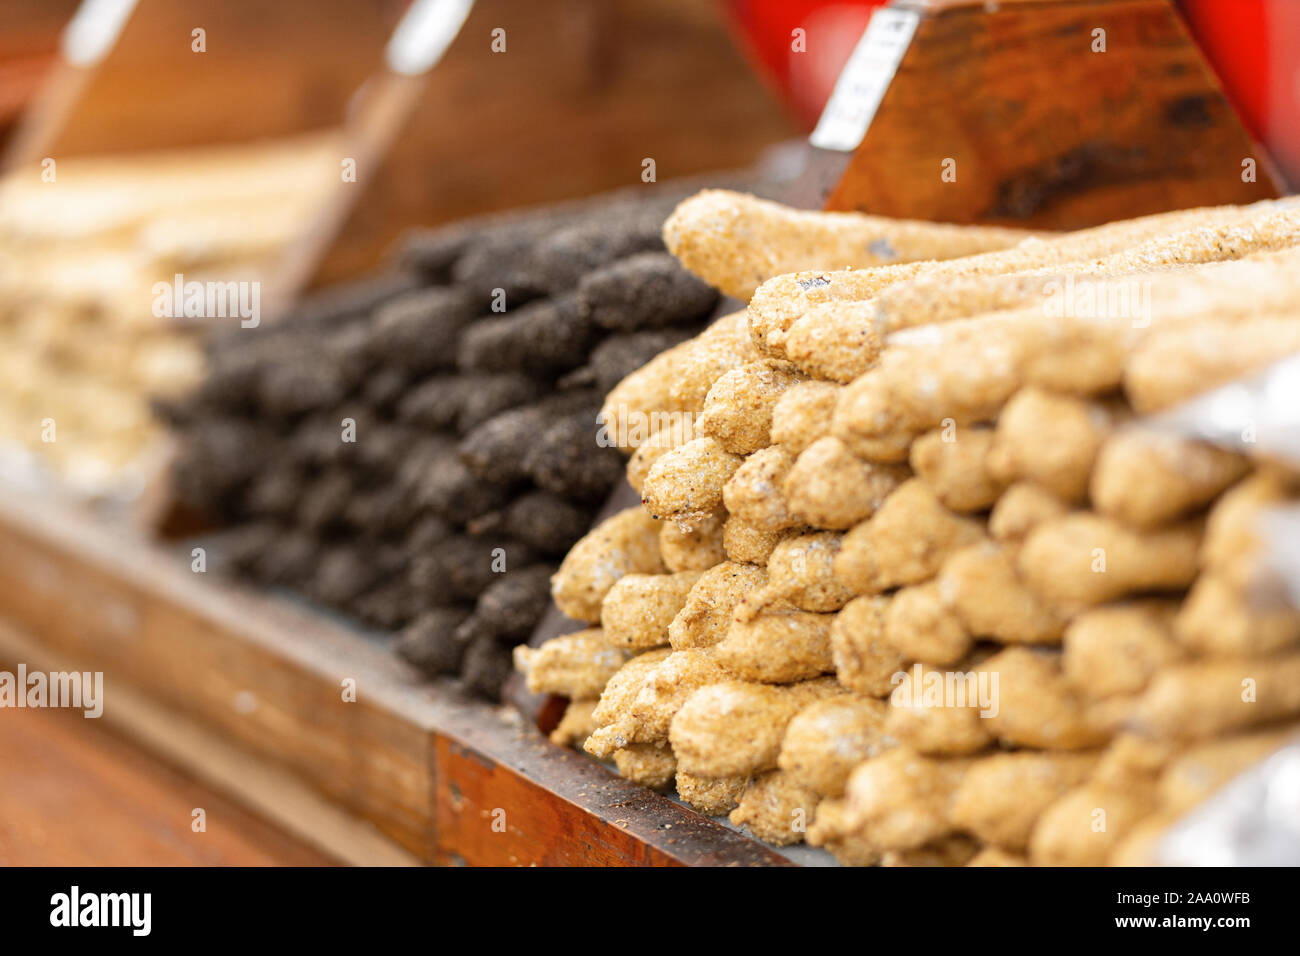 Selling smoked dried sausage in a shop in Spain. Stock Photo